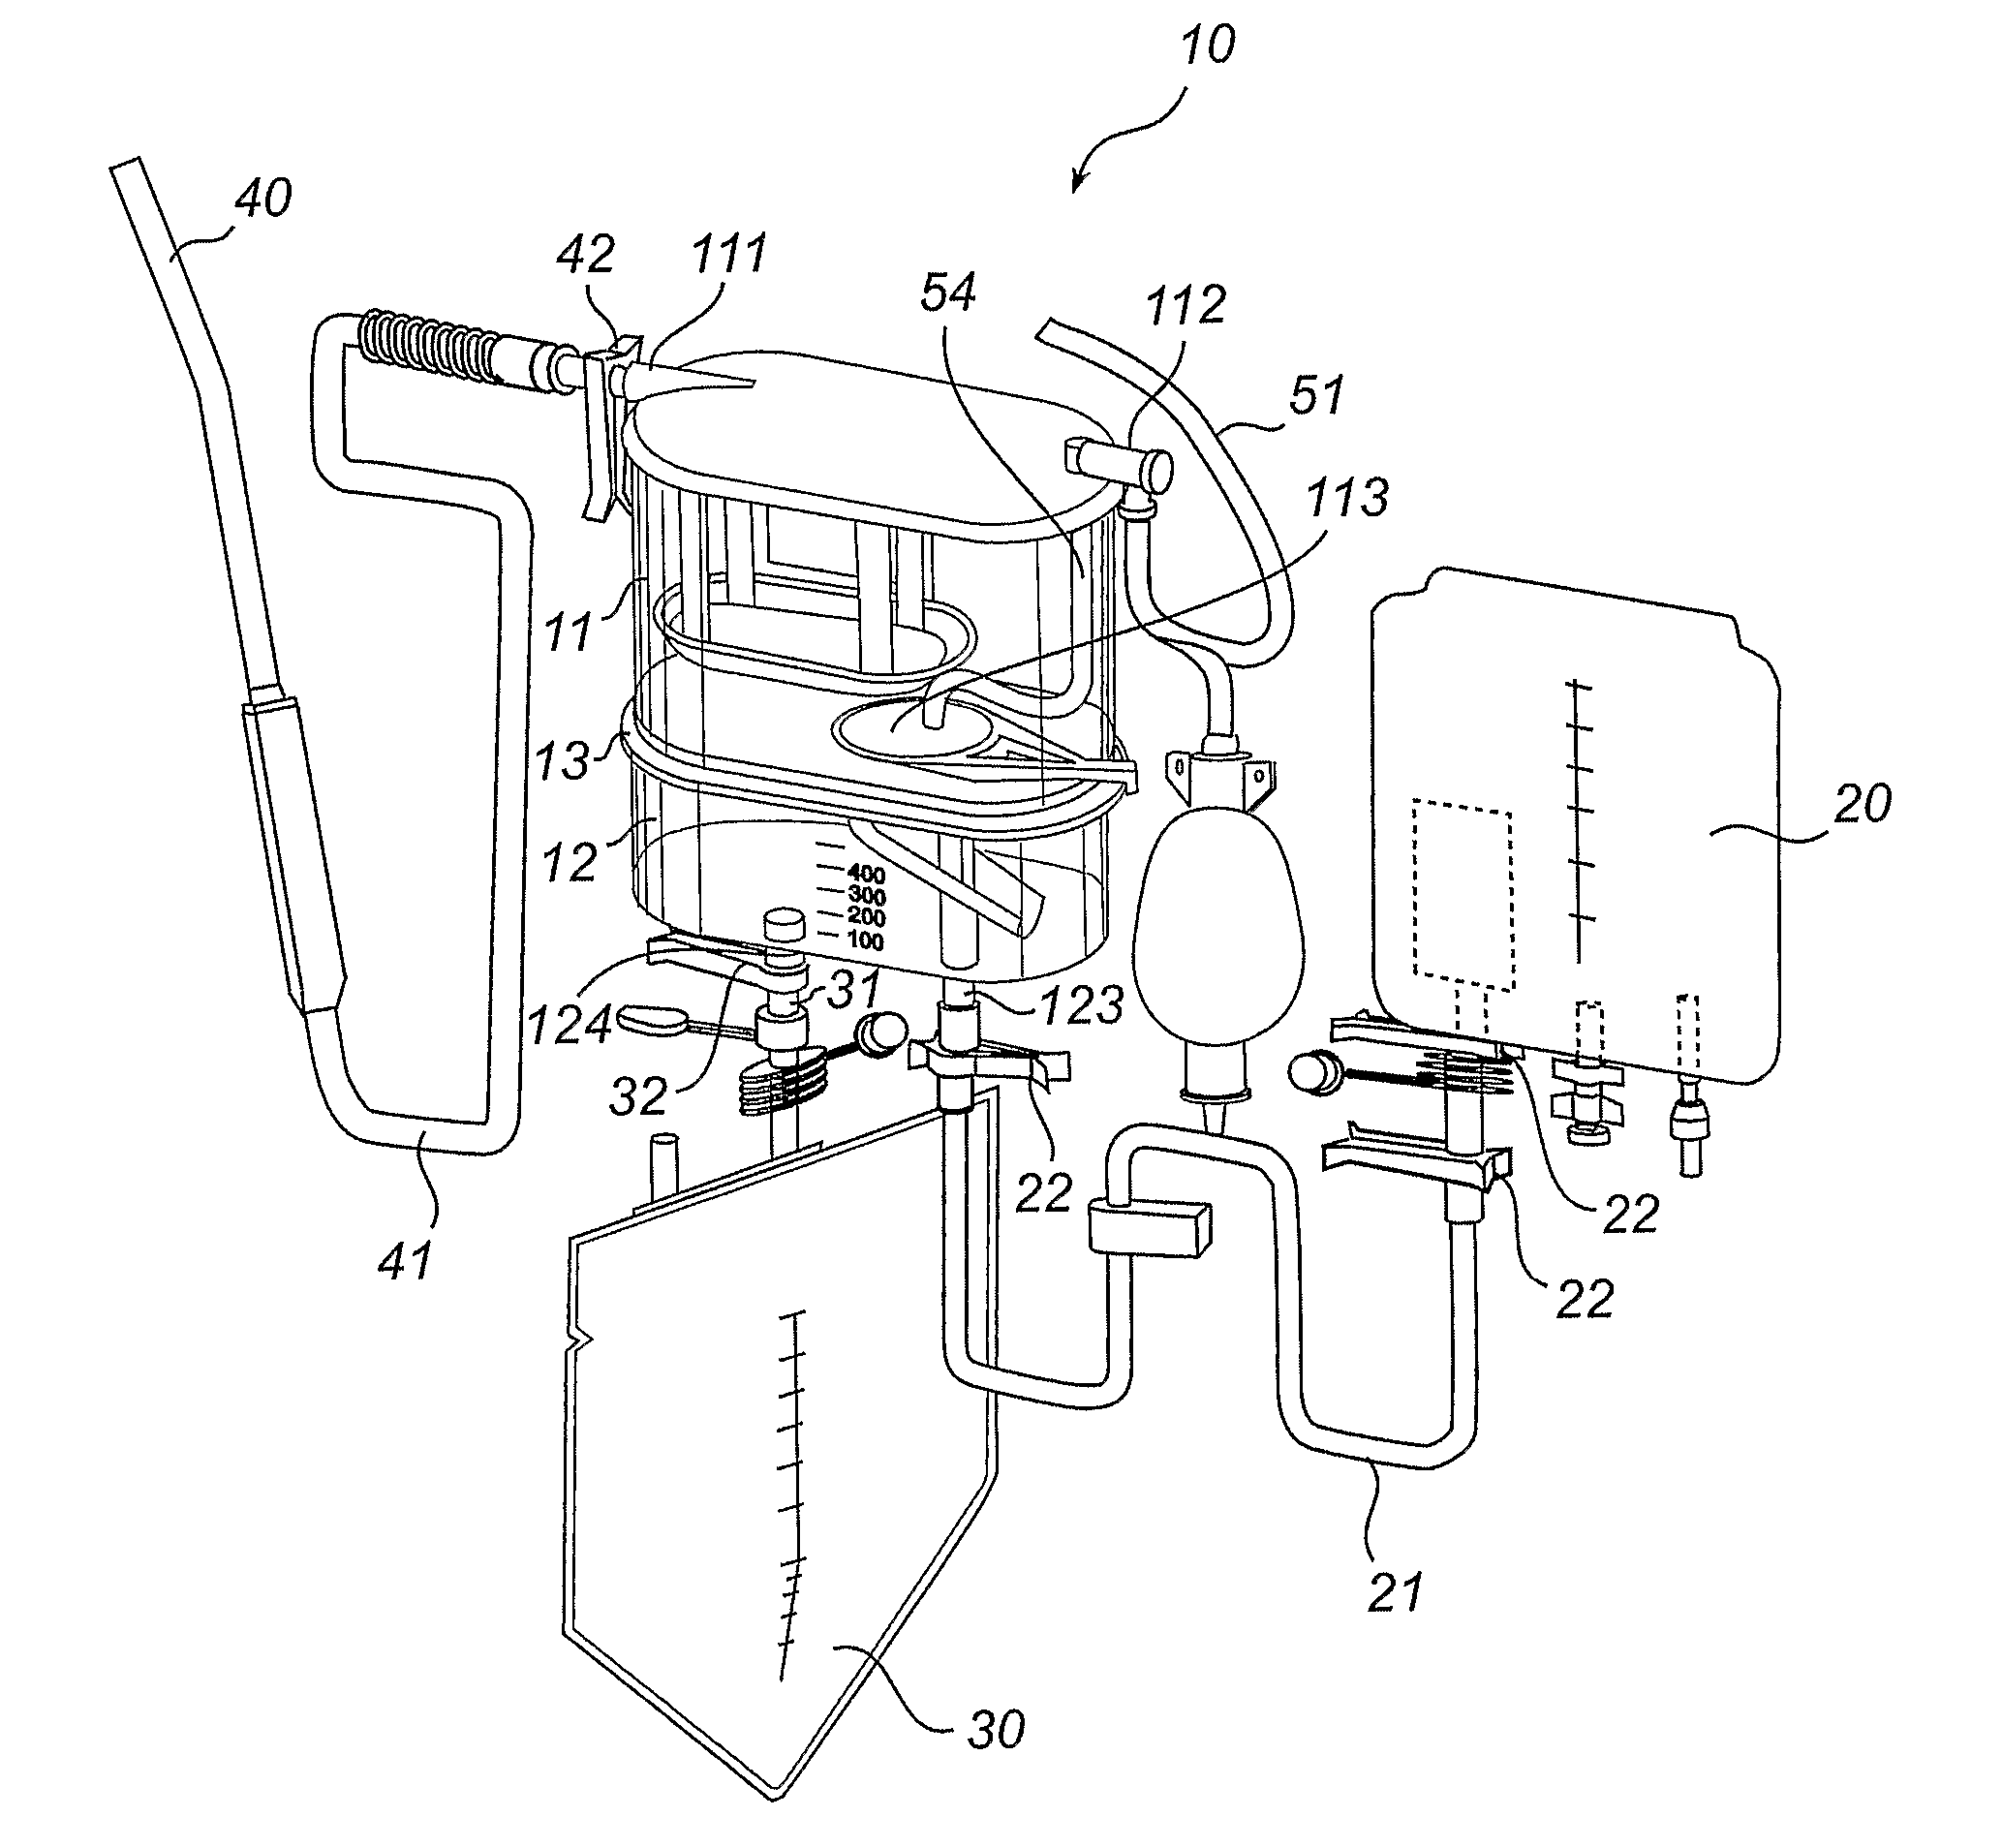 Method and apparatus for autotransfusion